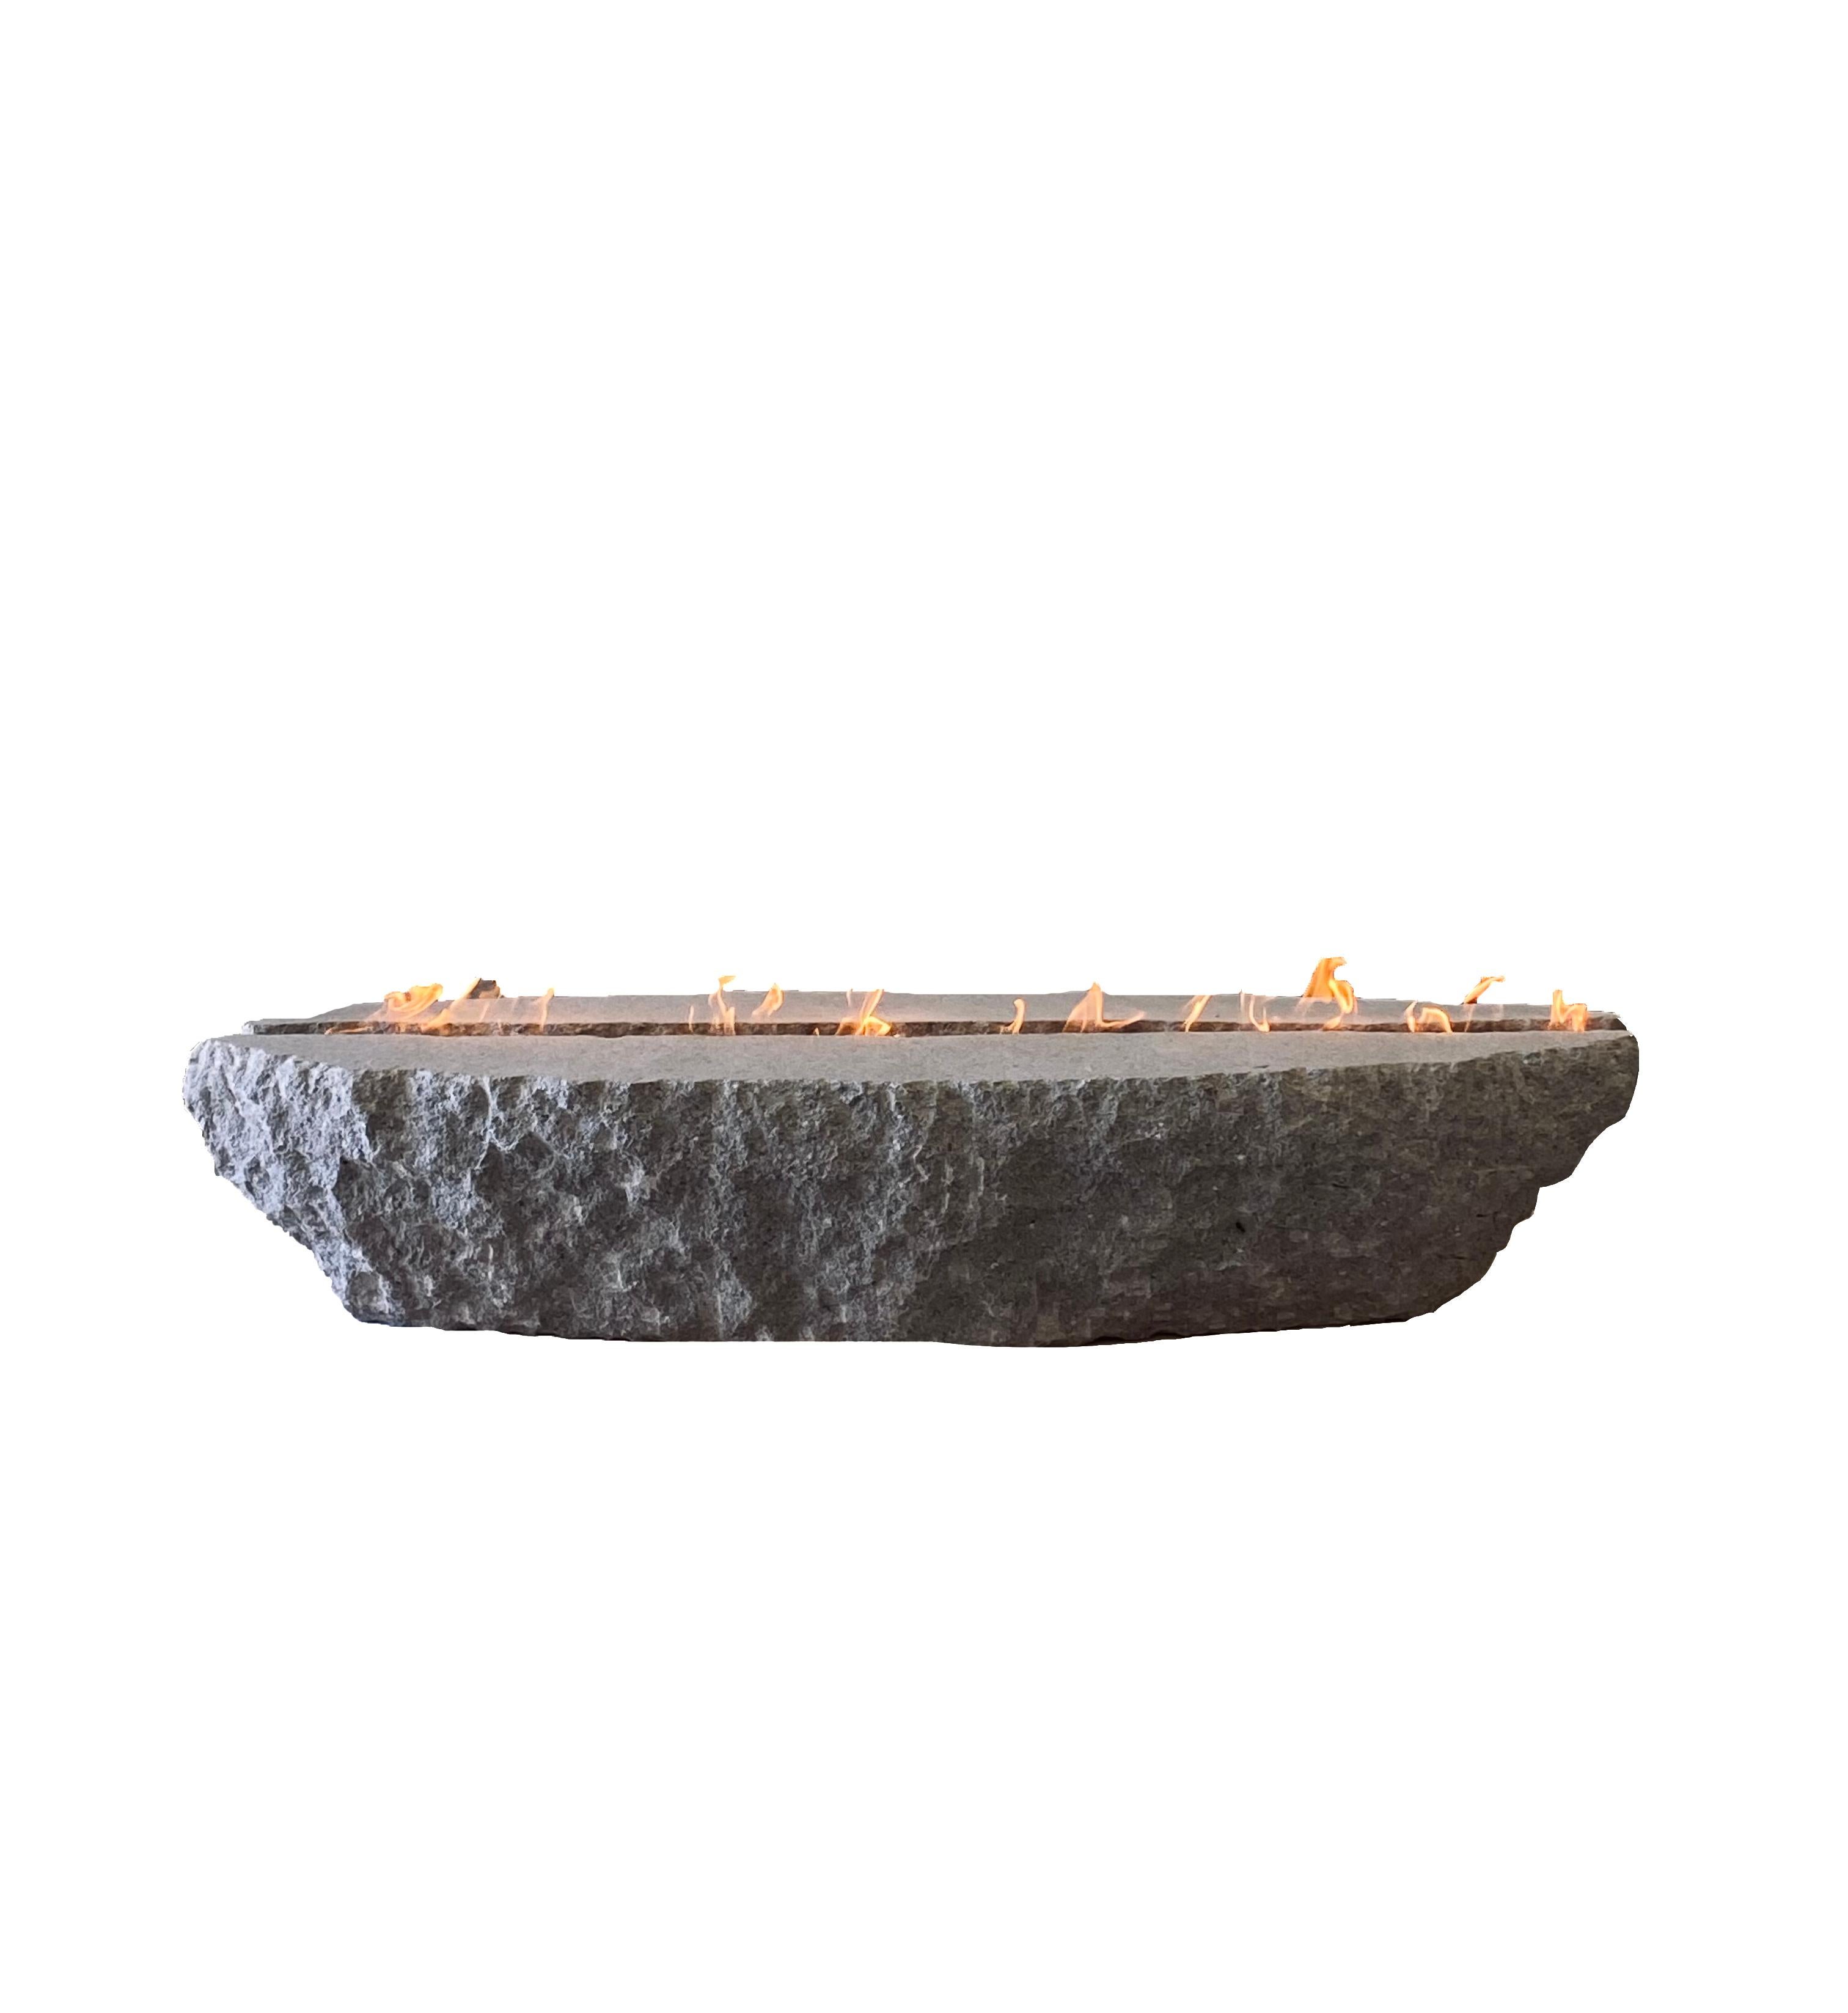 Escisión liquid fire table by Andres Monnier
One of a Kind.
Dimensions: W 80 x D 150 x H 30 cm.
Materials: Grey quarry stone.

Designer's biography
Treko concrete is a Mexican studio based in Ensenada, that has as a purpose to create